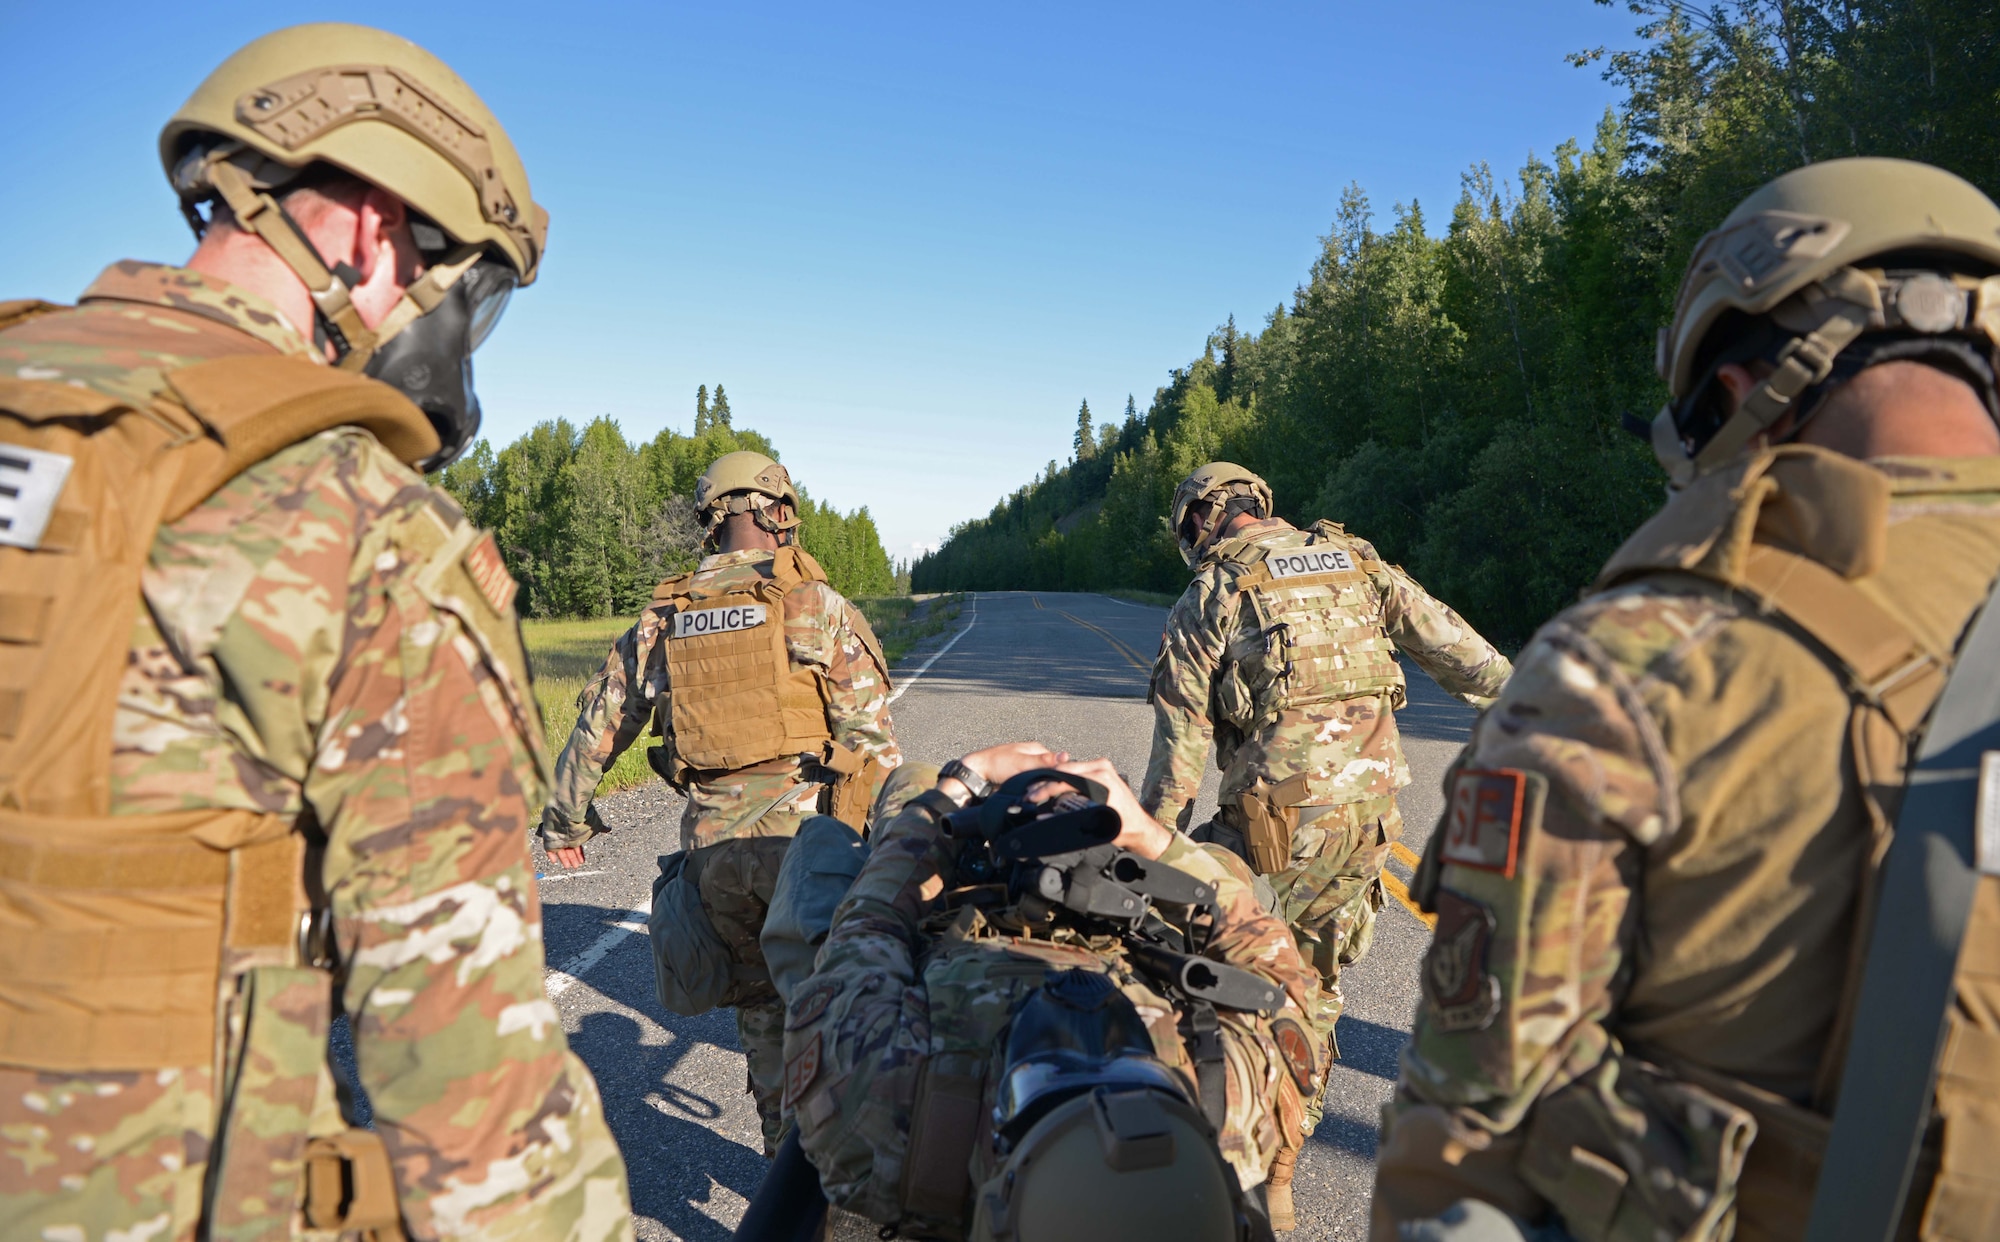 U.S. Air Force Airmen from the 354th Security Forces Squadron (SFS) carry a simulated casualty during special weapons and tactics (SWAT) training June 23, 2021 on Eielson Air Force Base, Alaska. The defenders took turns carrying a simulated casualty for approximately .75 miles to complete the SWAT training. (U.S. Air Force photo by Senior Airman Beaux Hebert)